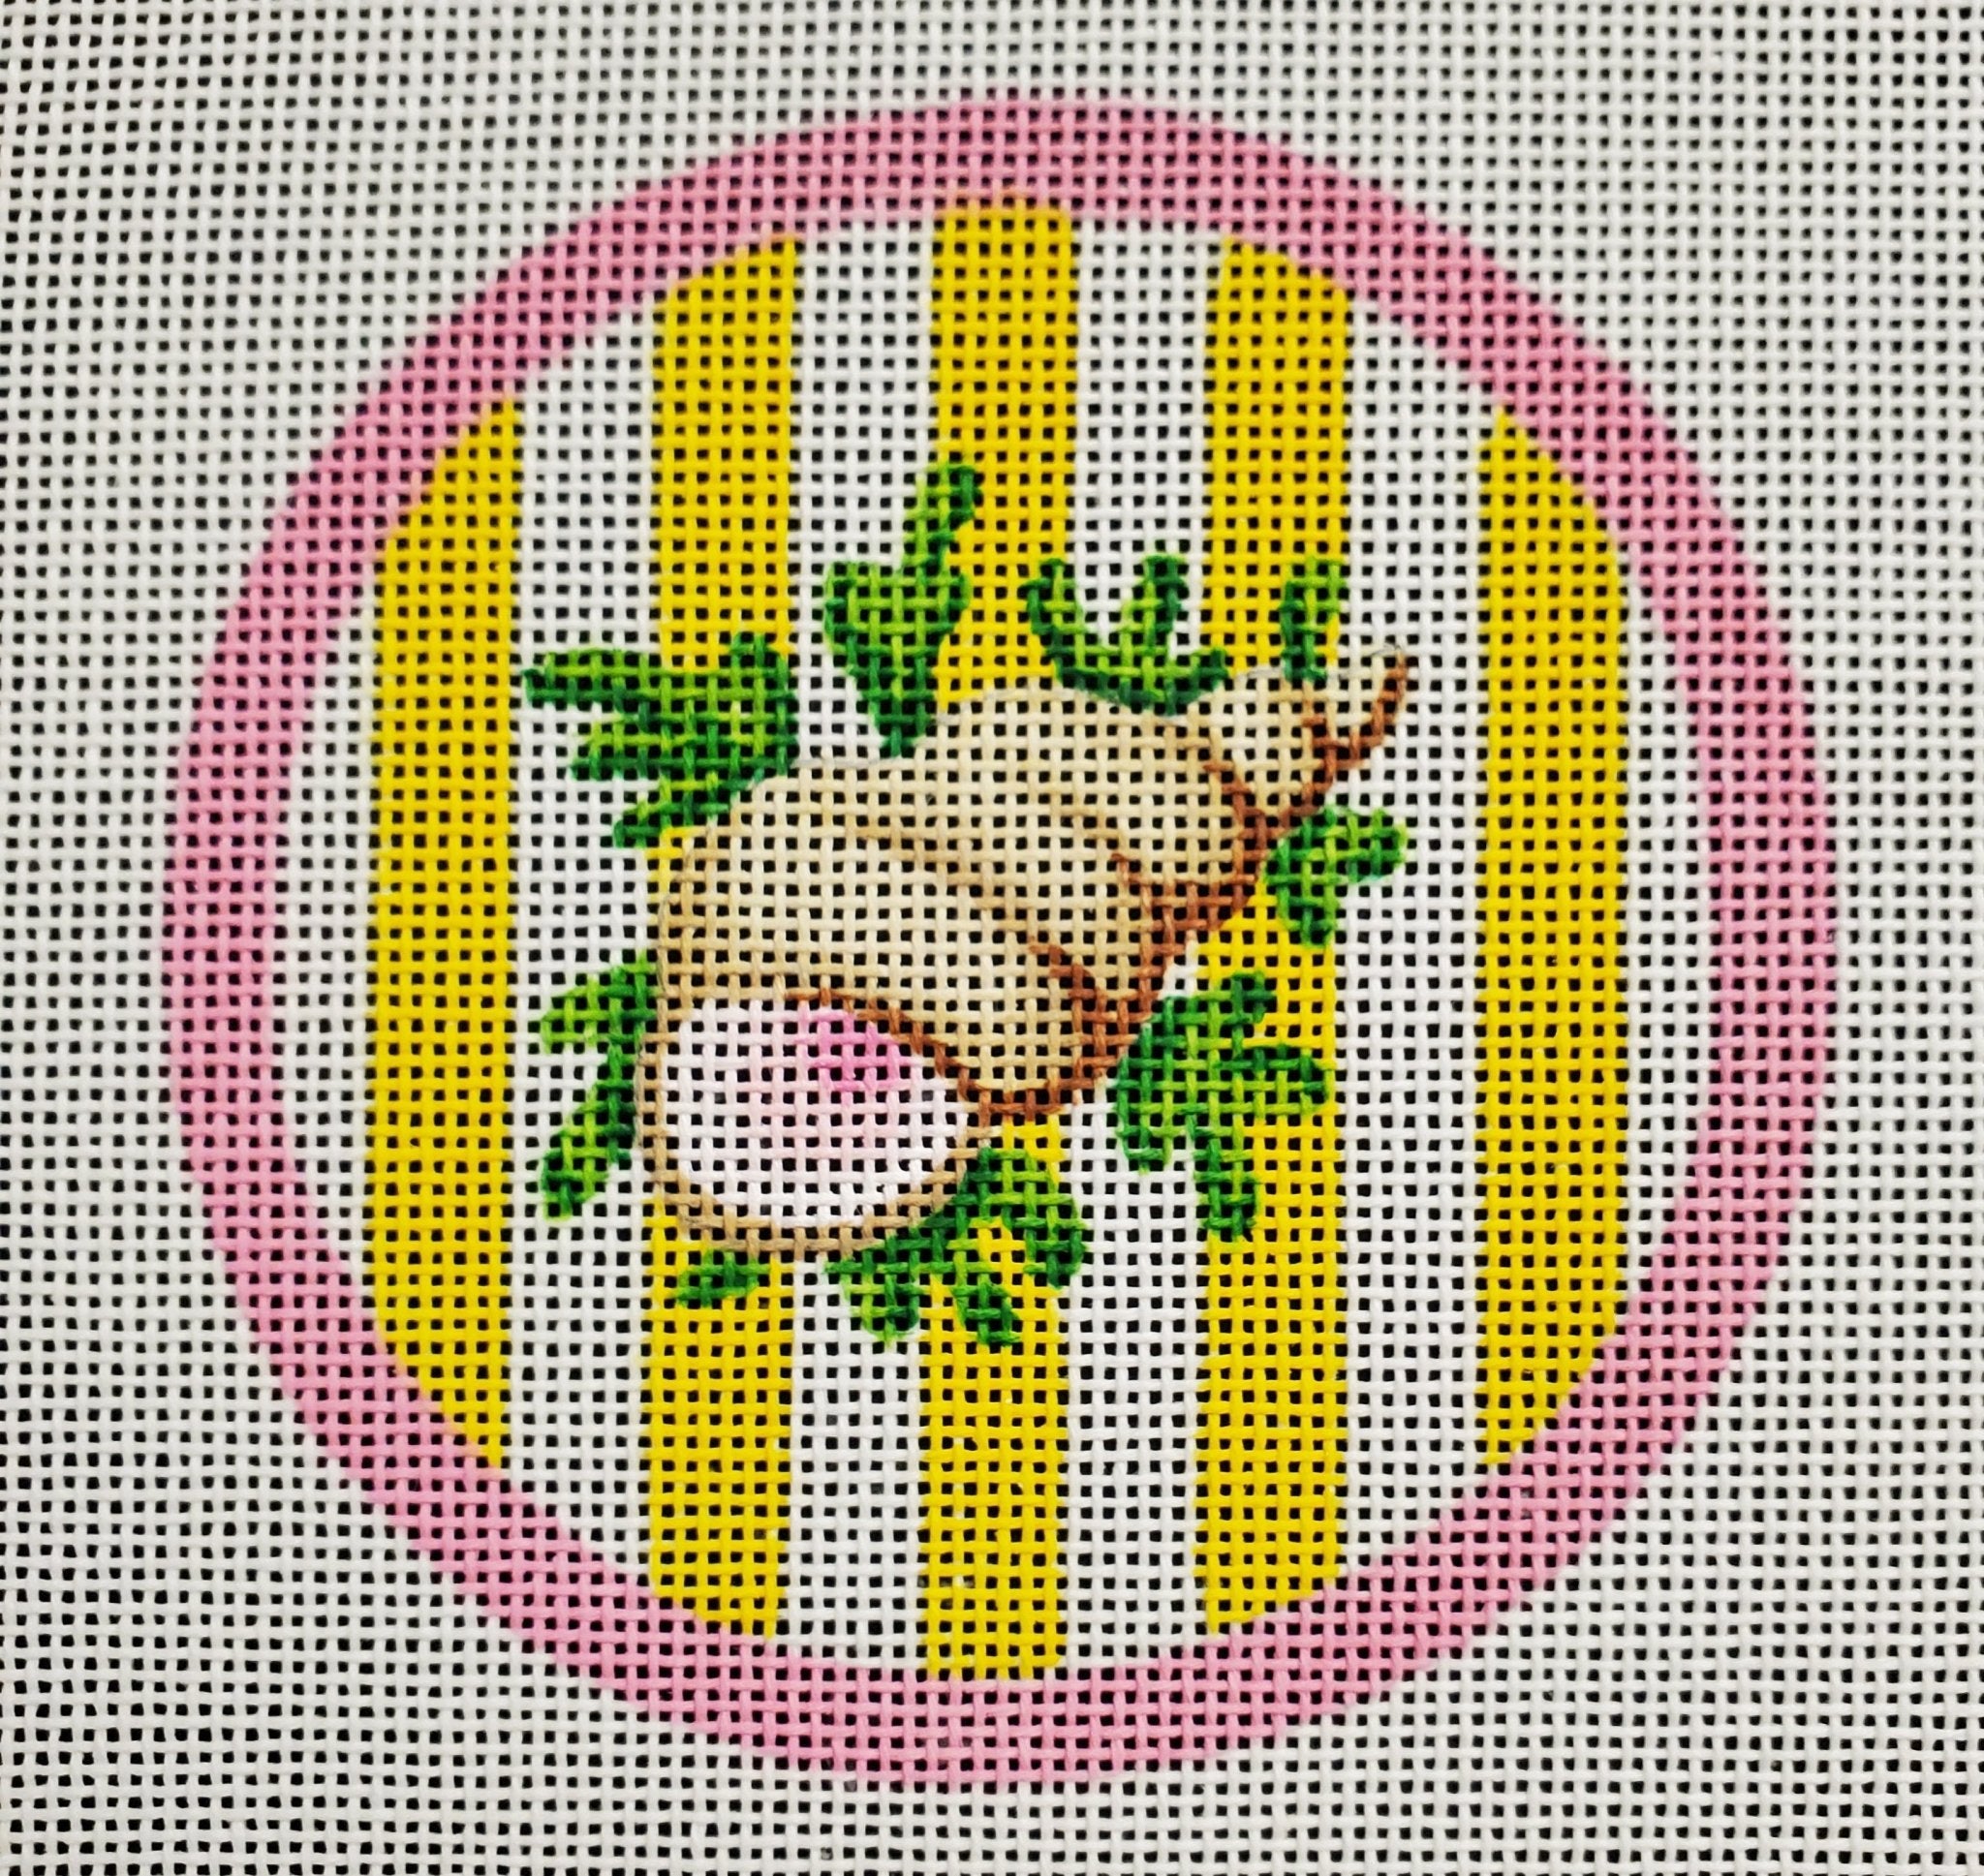 Snail on Yellow Cabana Stripes Ornament - The Flying Needles